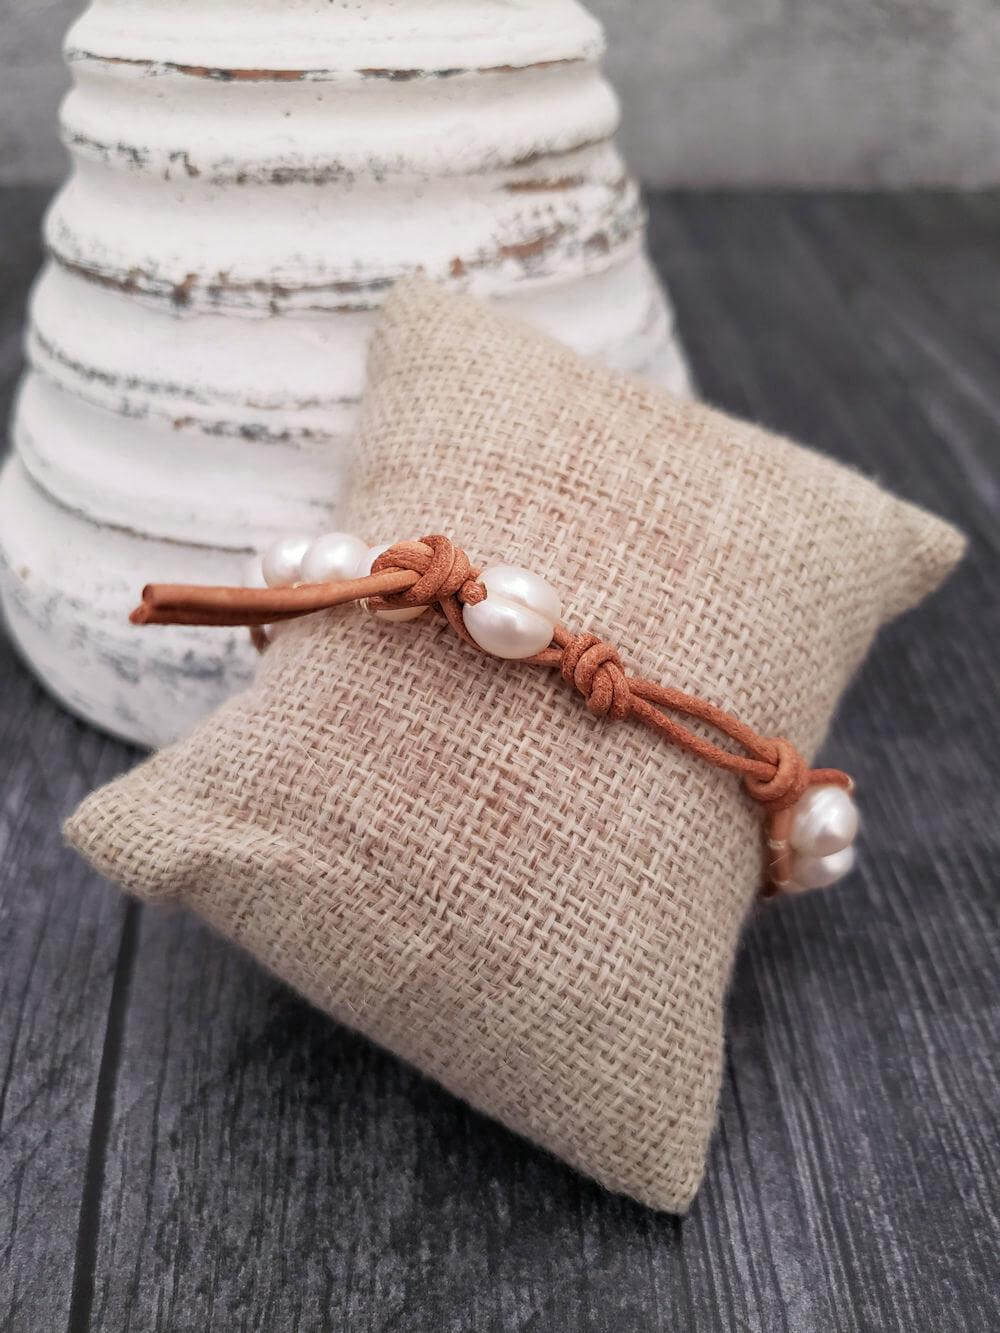 Leather and Pearl Bracelet - Light Tan Lether